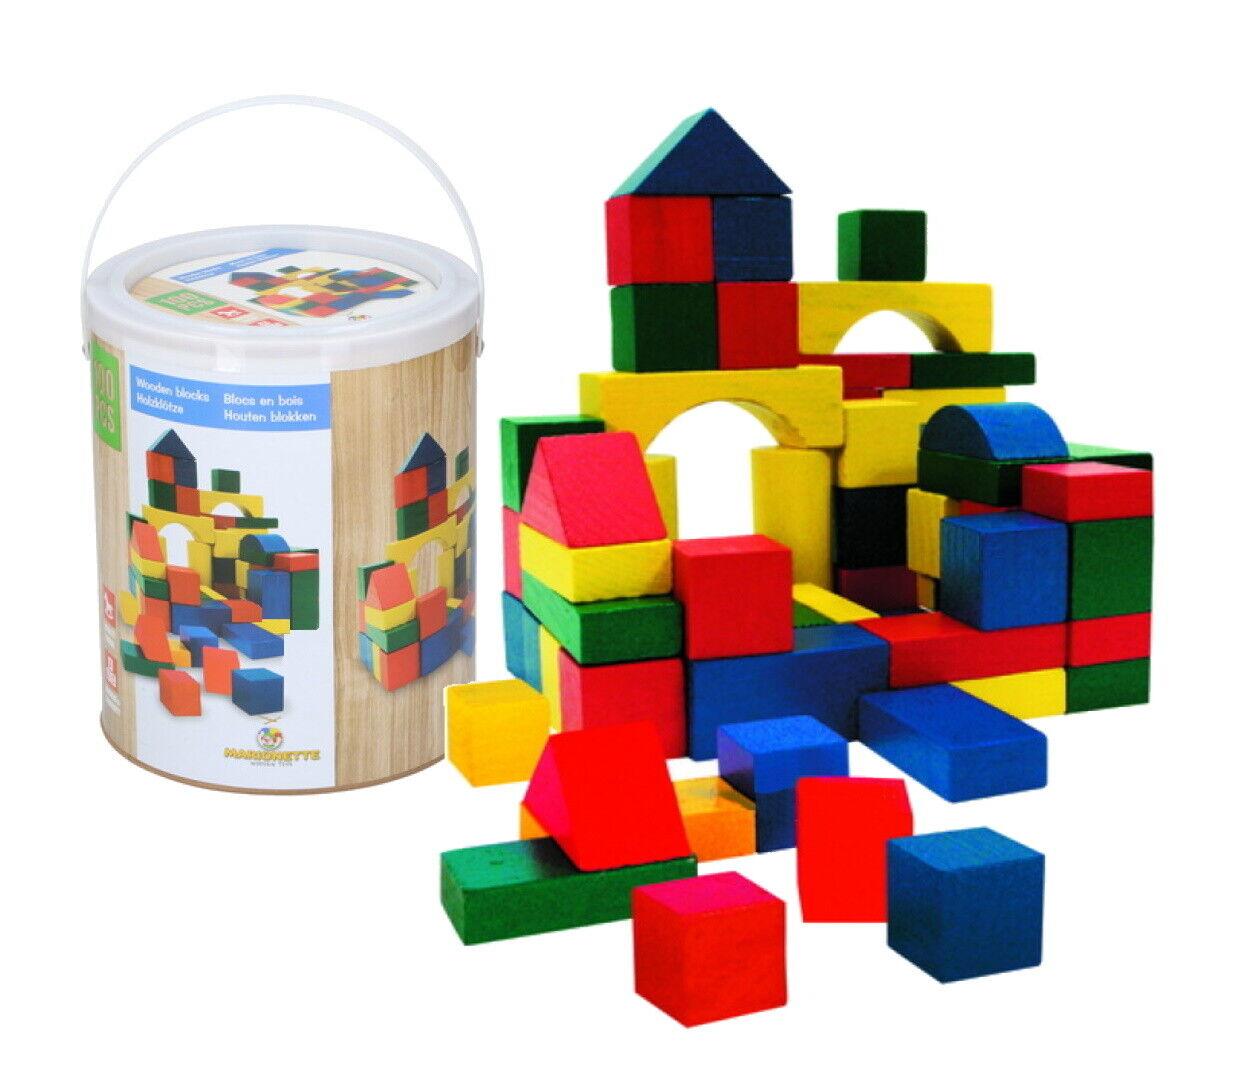 Details about   100pcs  Natural Wooden Cube Toys Square Cubes Bricks for Educational Toy Gift 